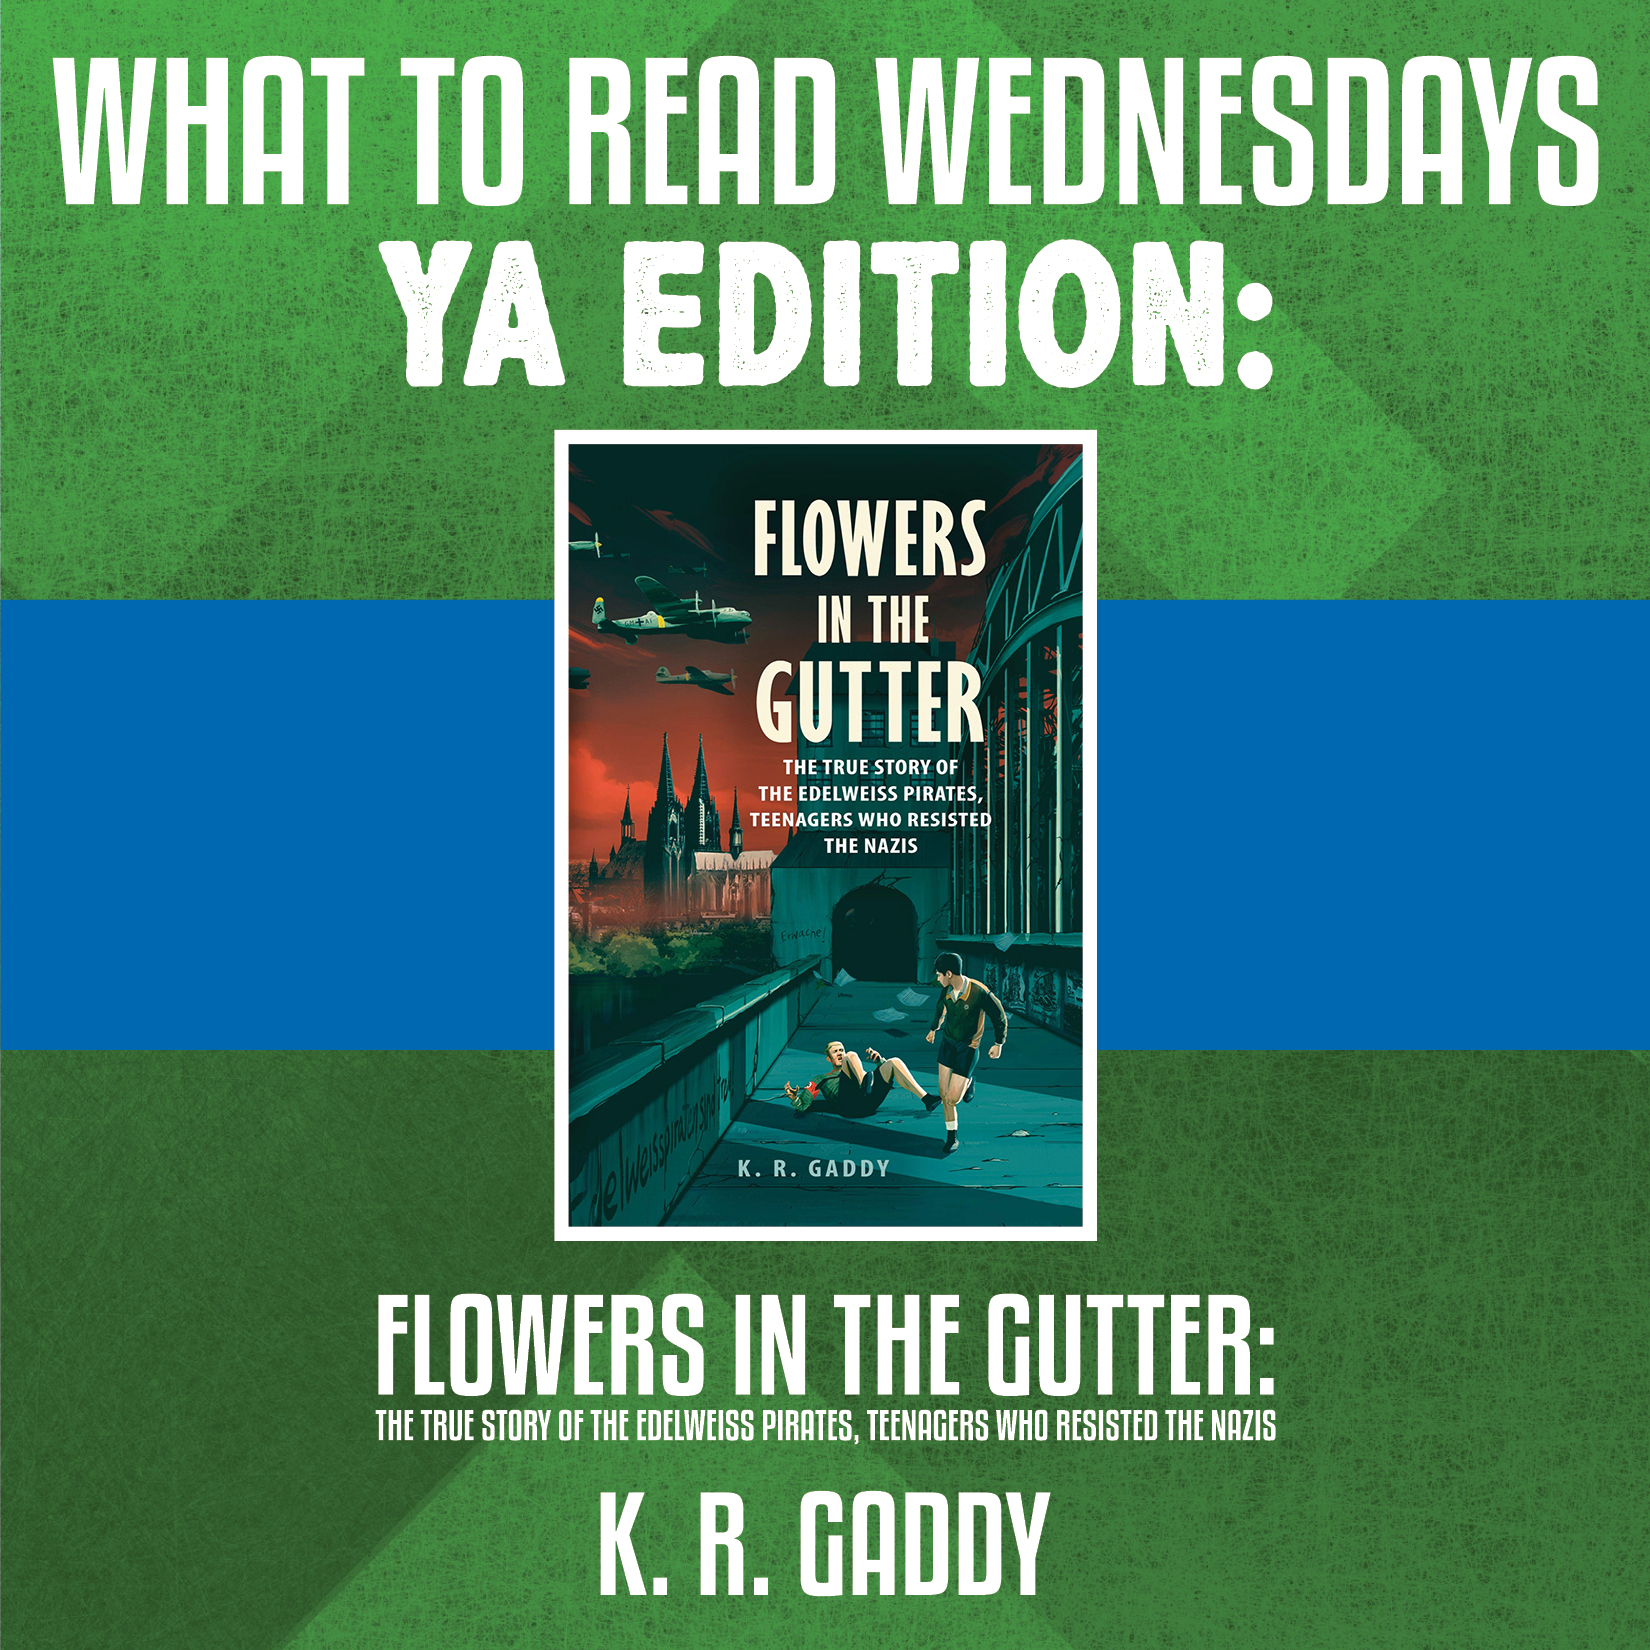 What to Read Wednesdays YA Edition: Flowers in the Gutter